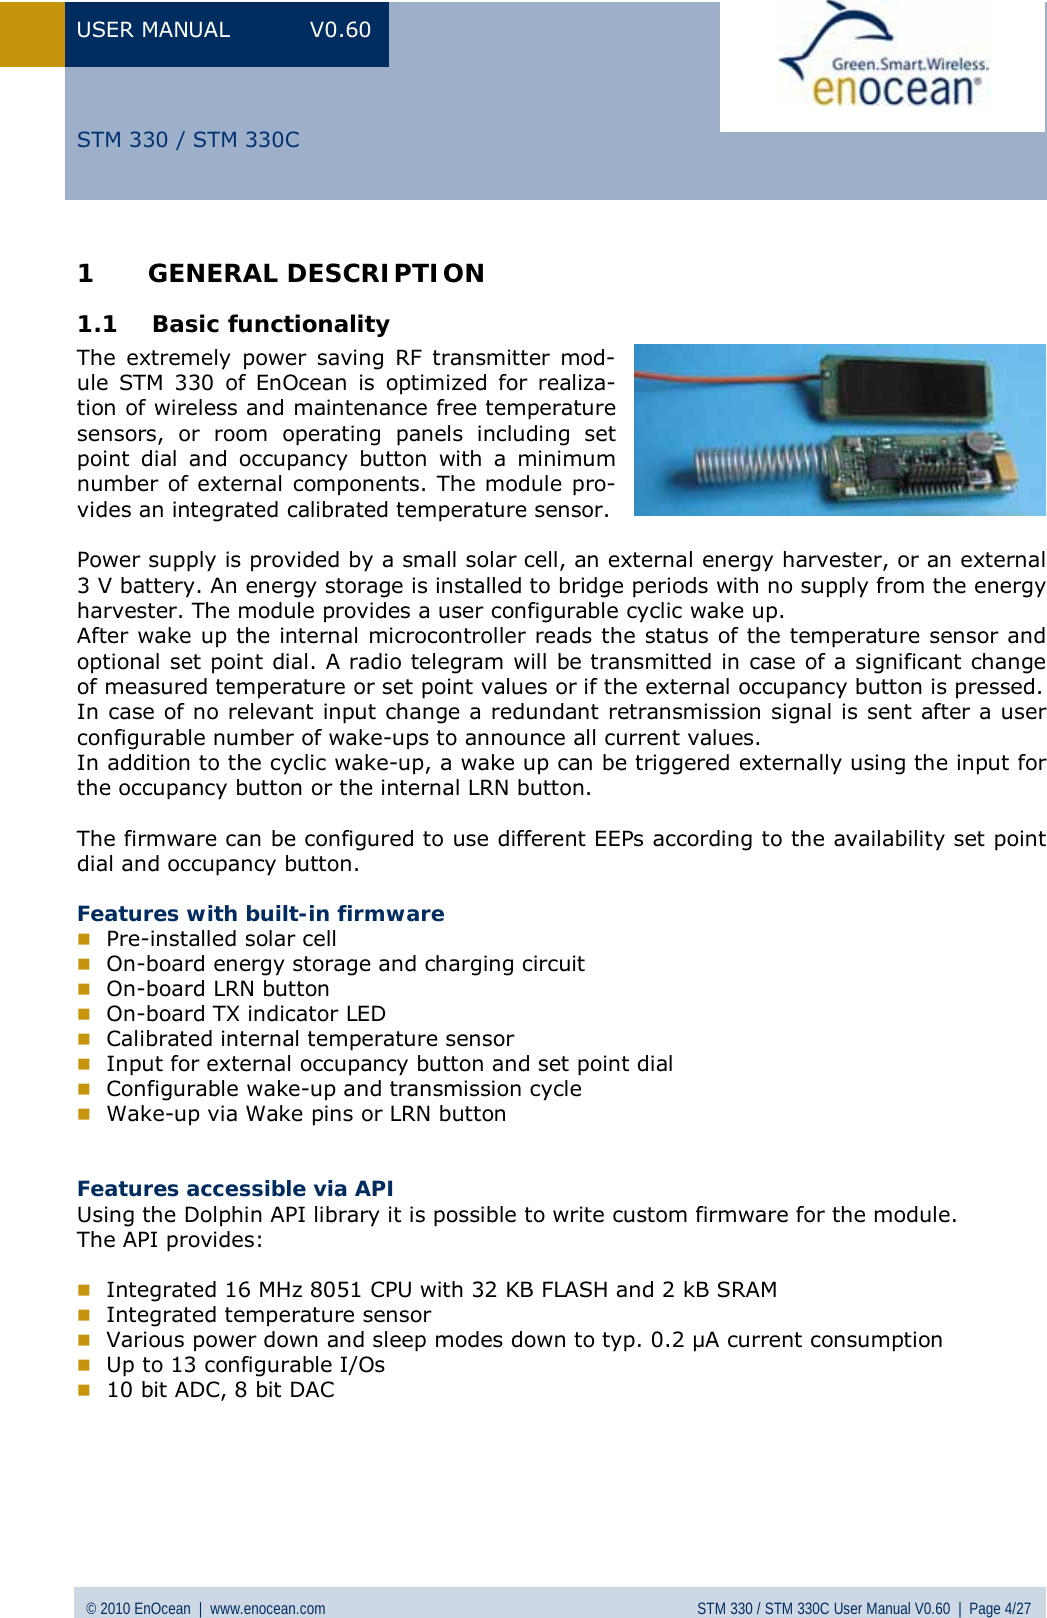 USER MANUAL V0.60 © 2010 EnOcean  |  www.enocean.com STM 330 / STM 330C User Manual V0.60  |  Page 4/27  STM 330 / STM 330C1 GENERAL DESCRIPTION 1.1 Basic functionality The extremely power saving RF transmitter mod-ule STM 330 of EnOcean is optimized for realiza-tion of wireless and maintenance free temperature sensors, or room operating panels including set point dial and occupancy button with a minimum number of external components. The module pro-vides an integrated calibrated temperature sensor.  Power supply is provided by a small solar cell, an external energy harvester, or an external 3 V battery. An energy storage is installed to bridge periods with no supply from the energy harvester. The module provides a user configurable cyclic wake up.  After wake up the internal microcontroller reads the status of the temperature sensor and optional set point dial. A radio telegram will be transmitted in case of a significant change of measured temperature or set point values or if the external occupancy button is pressed.  In case of no relevant input change a redundant retransmission signal is sent after a user configurable number of wake-ups to announce all current values.  In addition to the cyclic wake-up, a wake up can be triggered externally using the input for the occupancy button or the internal LRN button.  The firmware can be configured to use different EEPs according to the availability set point dial and occupancy button.  Features with built-in firmware  Pre-installed solar cell  On-board energy storage and charging circuit  On-board LRN button   On-board TX indicator LED  Calibrated internal temperature sensor  Input for external occupancy button and set point dial  Configurable wake-up and transmission cycle  Wake-up via Wake pins or LRN button   Features accessible via API Using the Dolphin API library it is possible to write custom firmware for the module. The API provides:   Integrated 16 MHz 8051 CPU with 32 KB FLASH and 2 kB SRAM  Integrated temperature sensor  Various power down and sleep modes down to typ. 0.2 µA current consumption  Up to 13 configurable I/Os  10 bit ADC, 8 bit DAC      